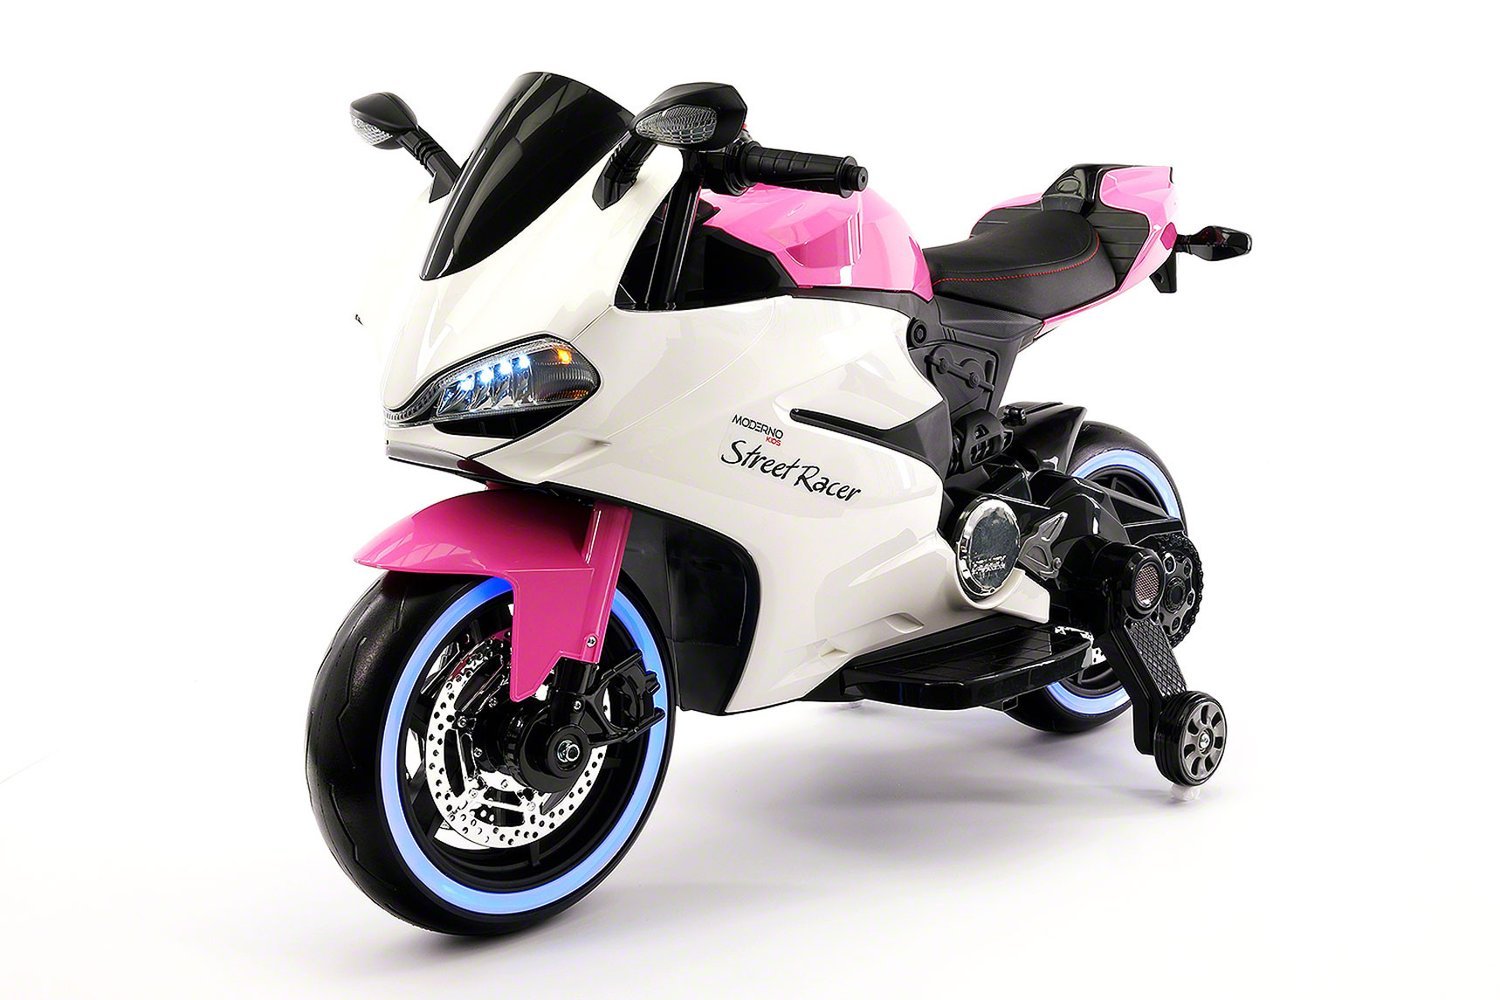 2021 DUCATI RACER STYLE Kids Ride On Car Toy Motorcycle 12V Battery Powered PINK